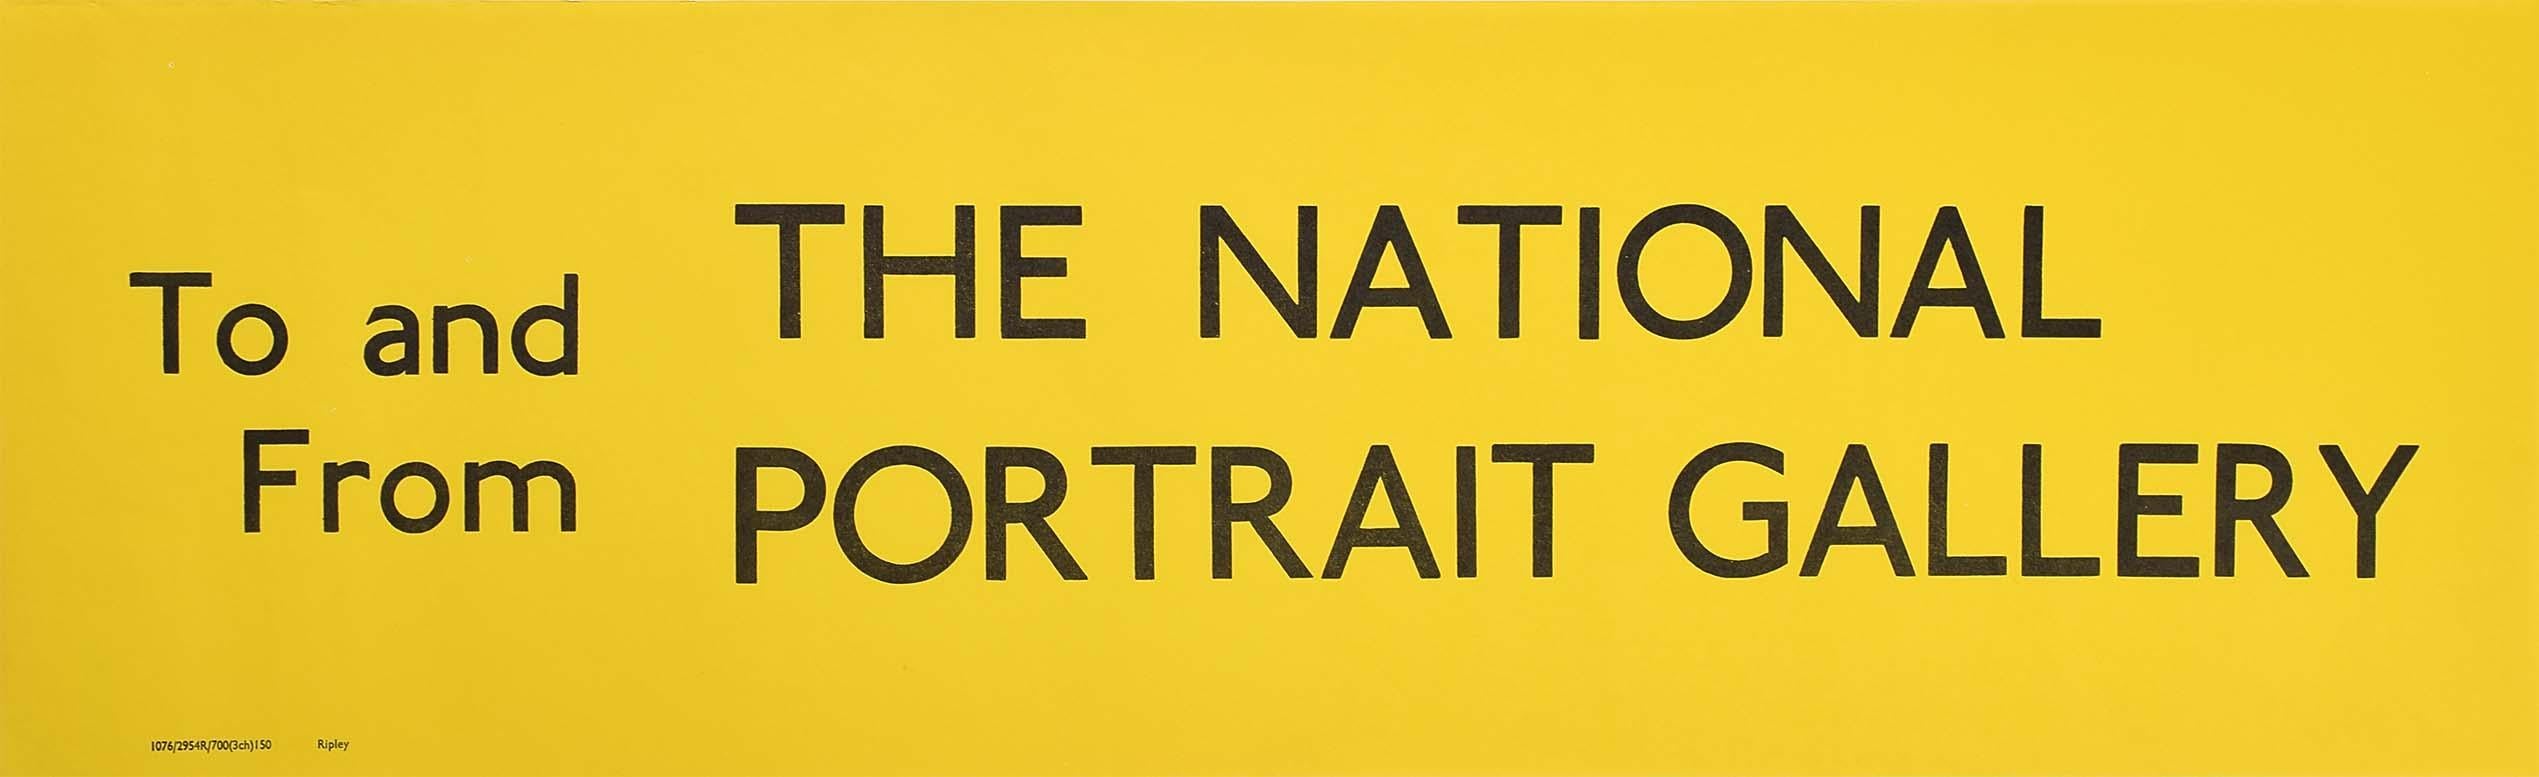 Unknown Print - National Portrait Gallery, London England Routemaster Bus sign c. 1970 poster